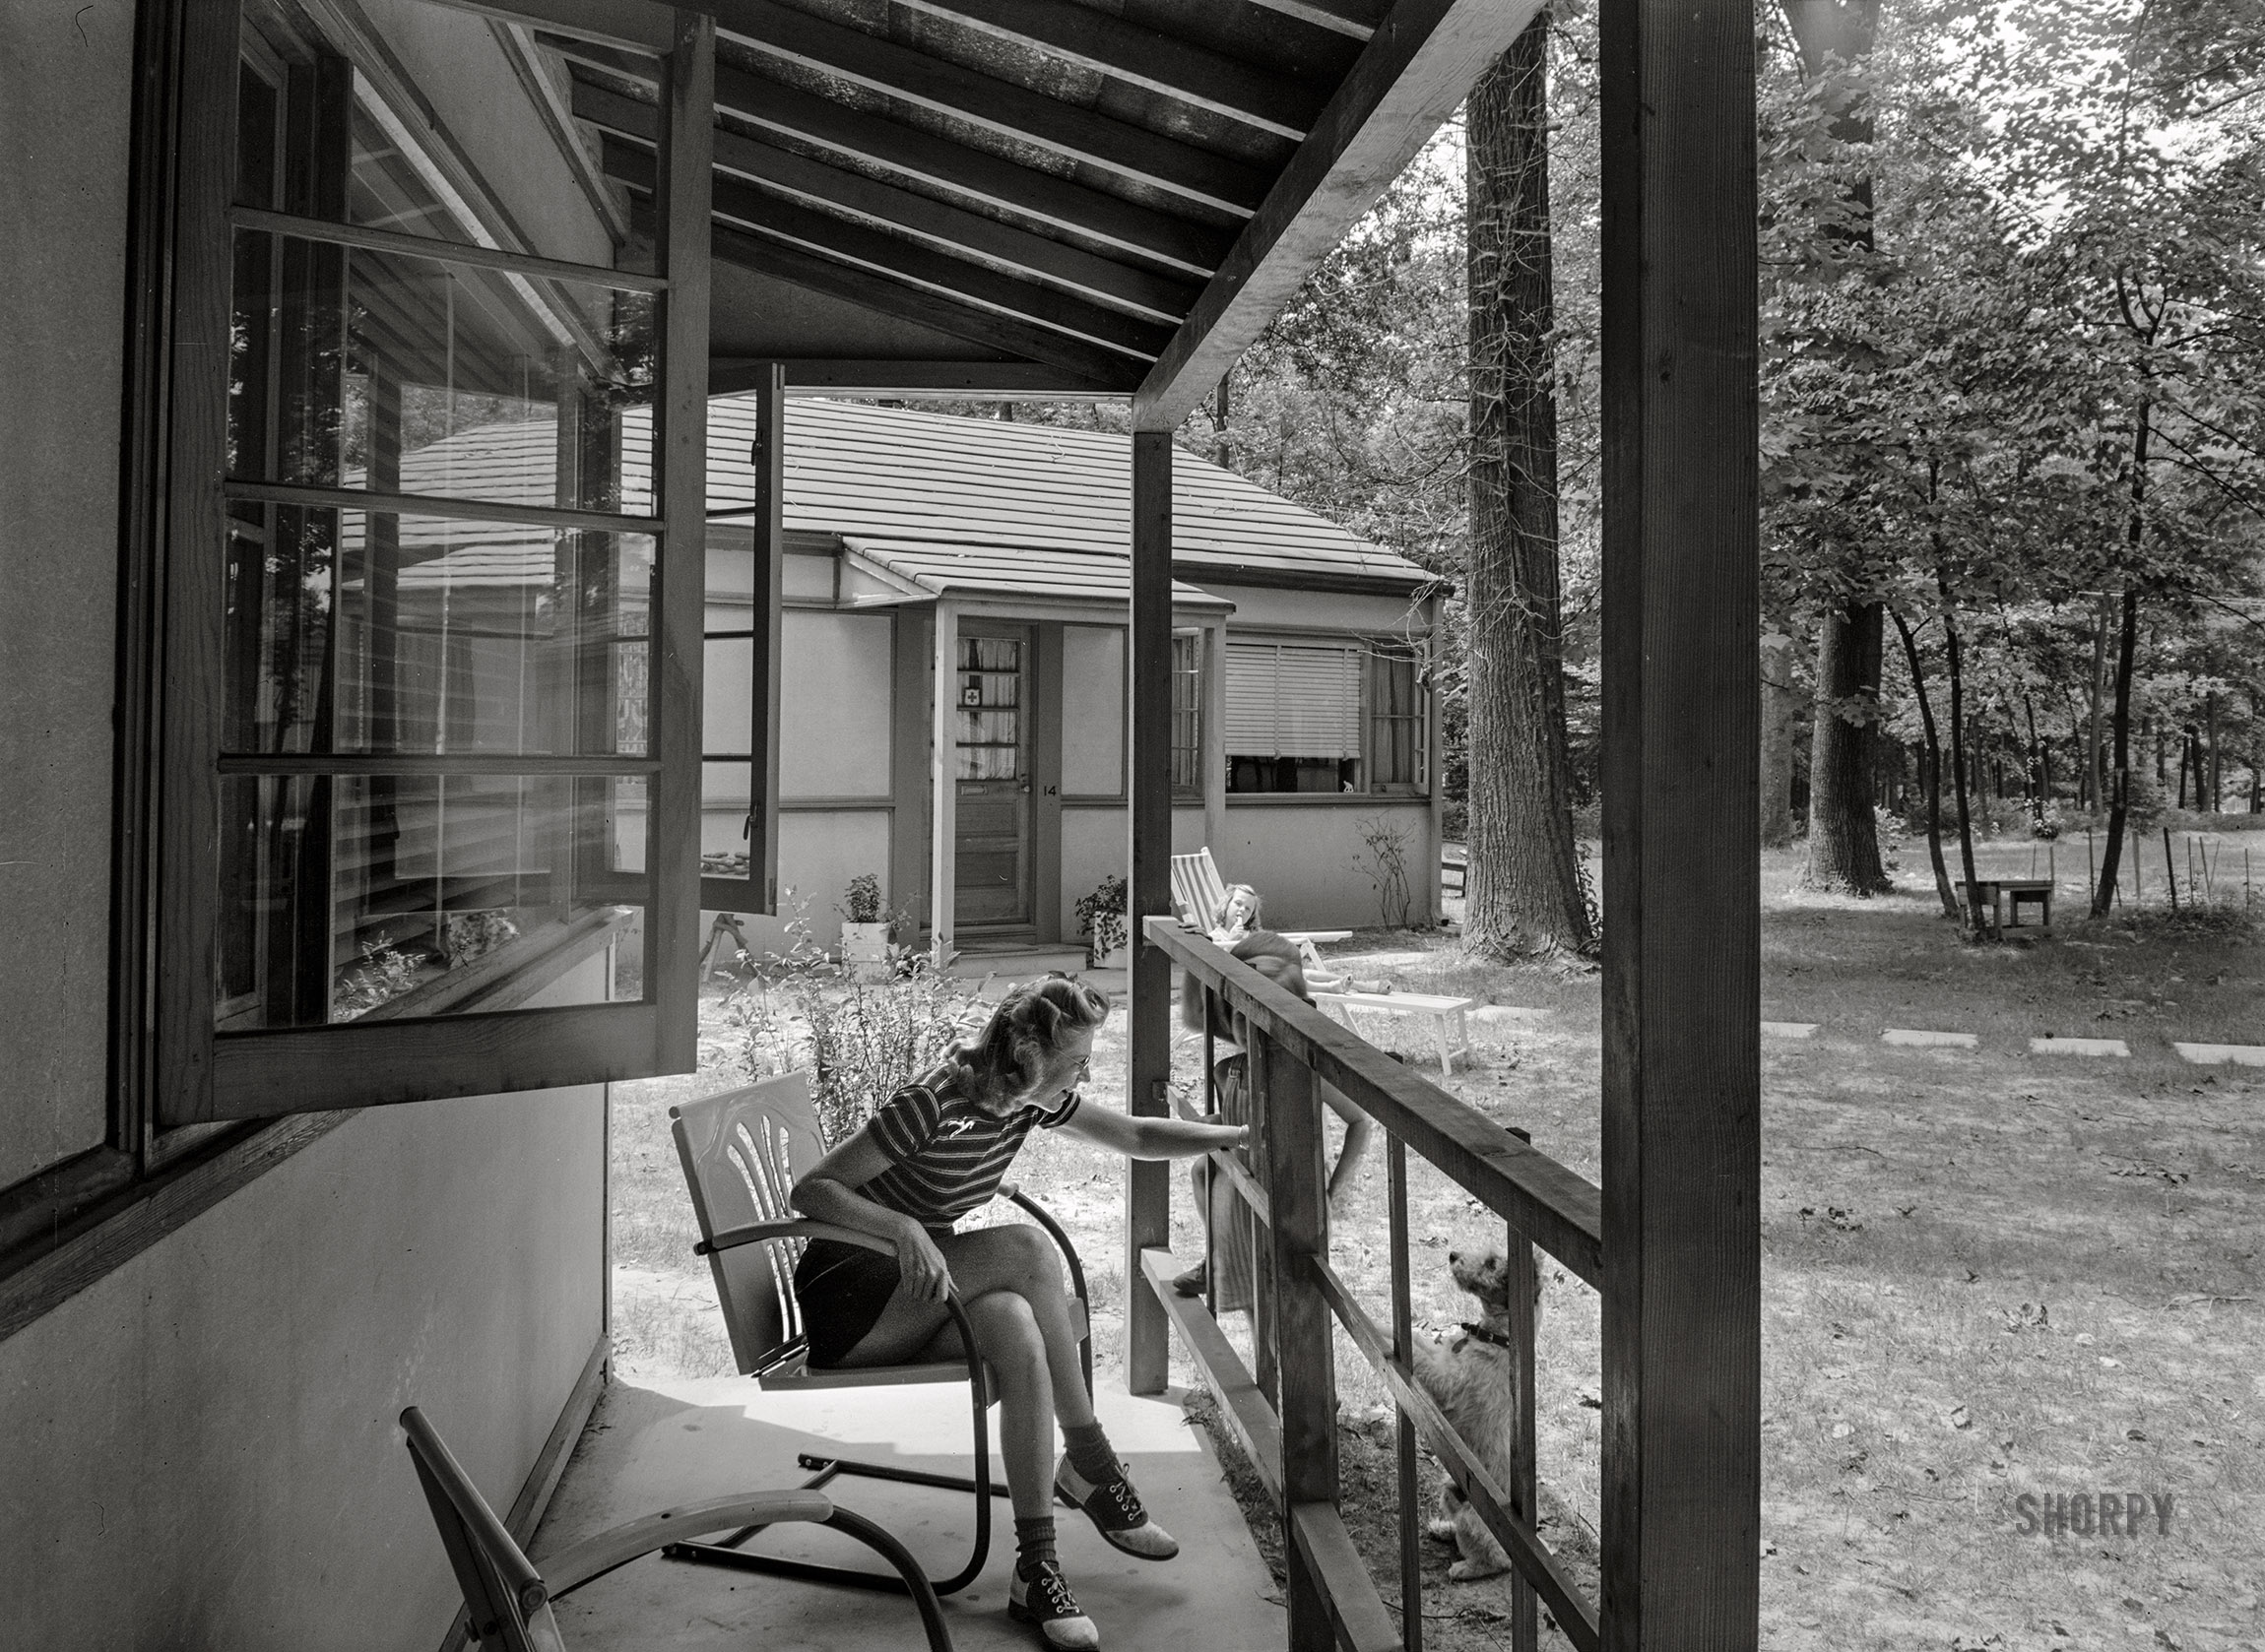 July 1942. "Middle River, Maryland. Stansbury Estates, housing development for workers at the Glenn L. Martin aircraft plant. Some houses have porches at the back. They are all alike, have four rooms, are made of Cemesto Board." Acetate negative by Marjory Collins. View full size.